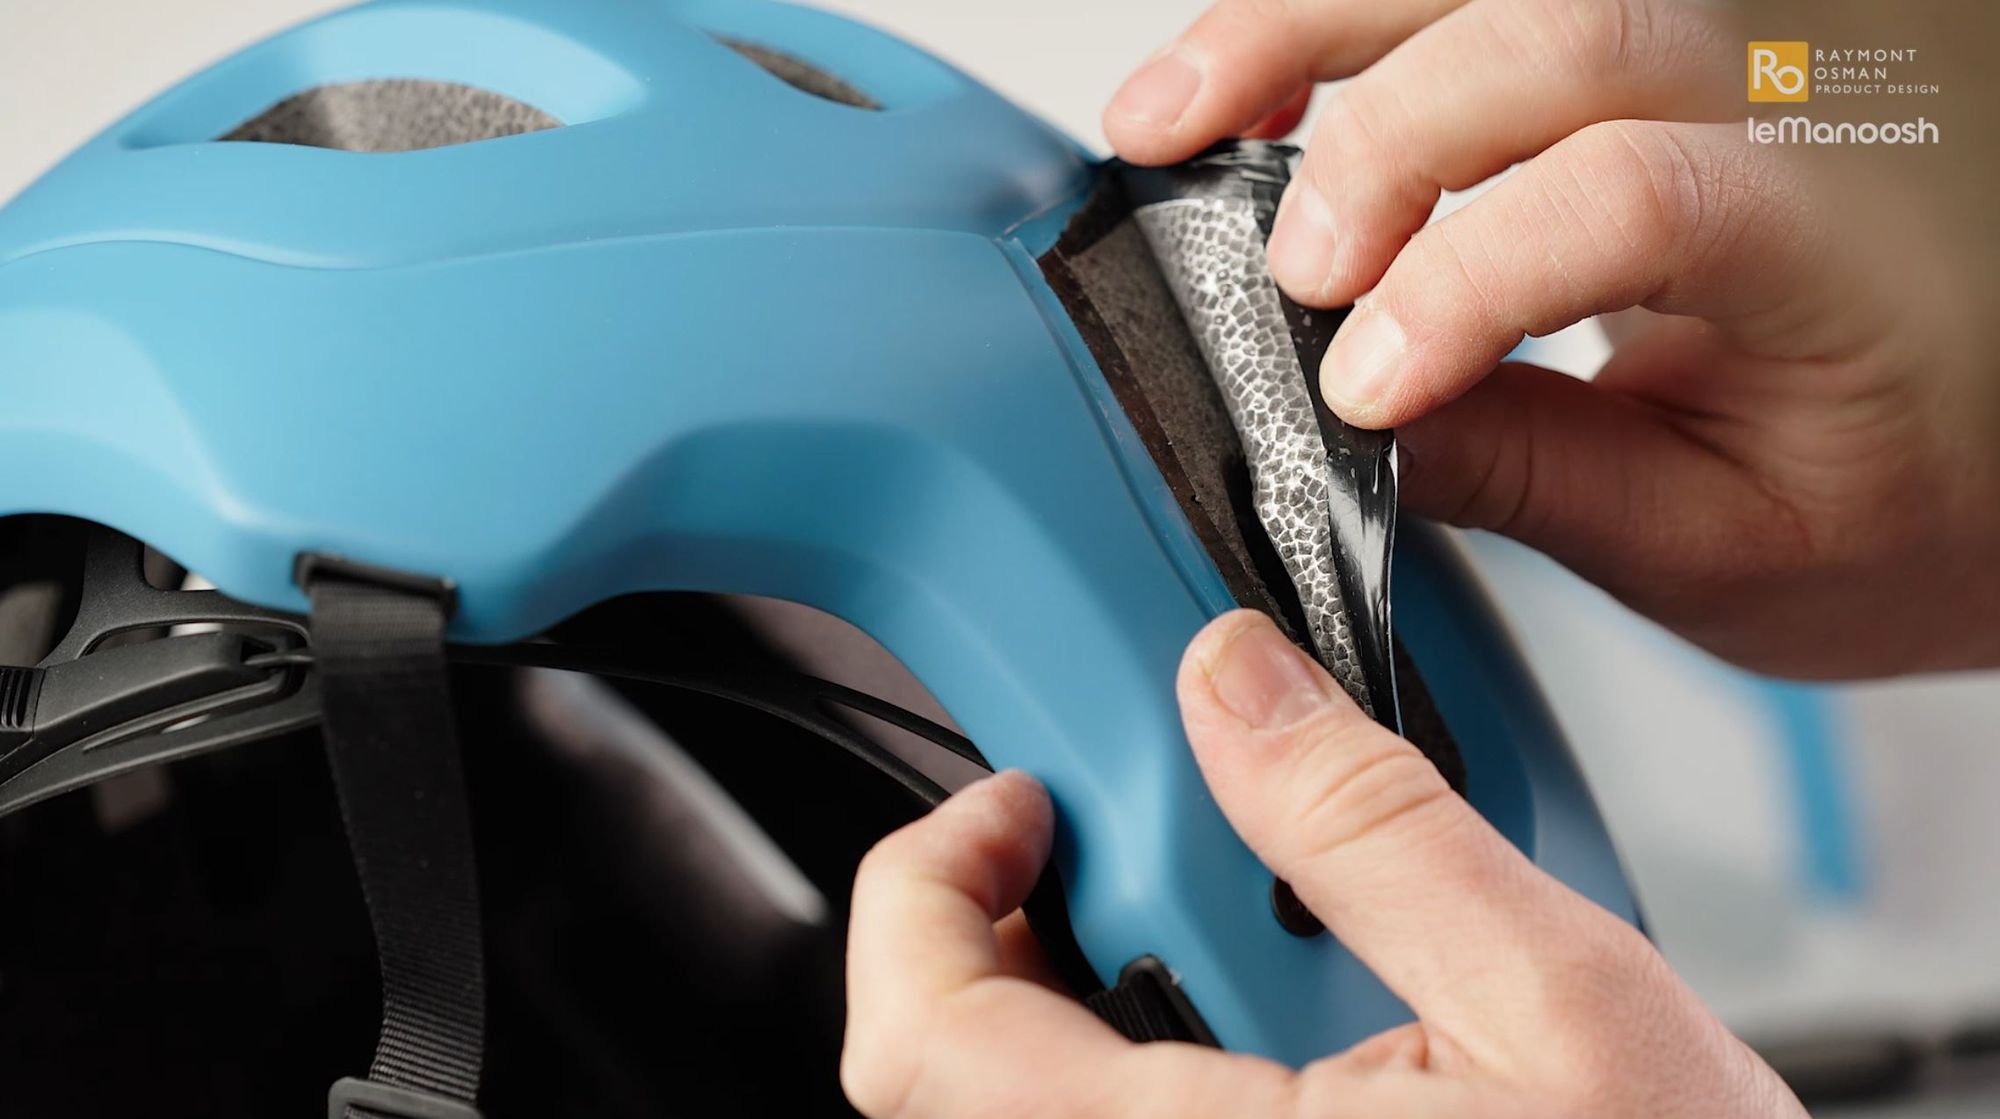 An engineer examines the construction of a bike helmet